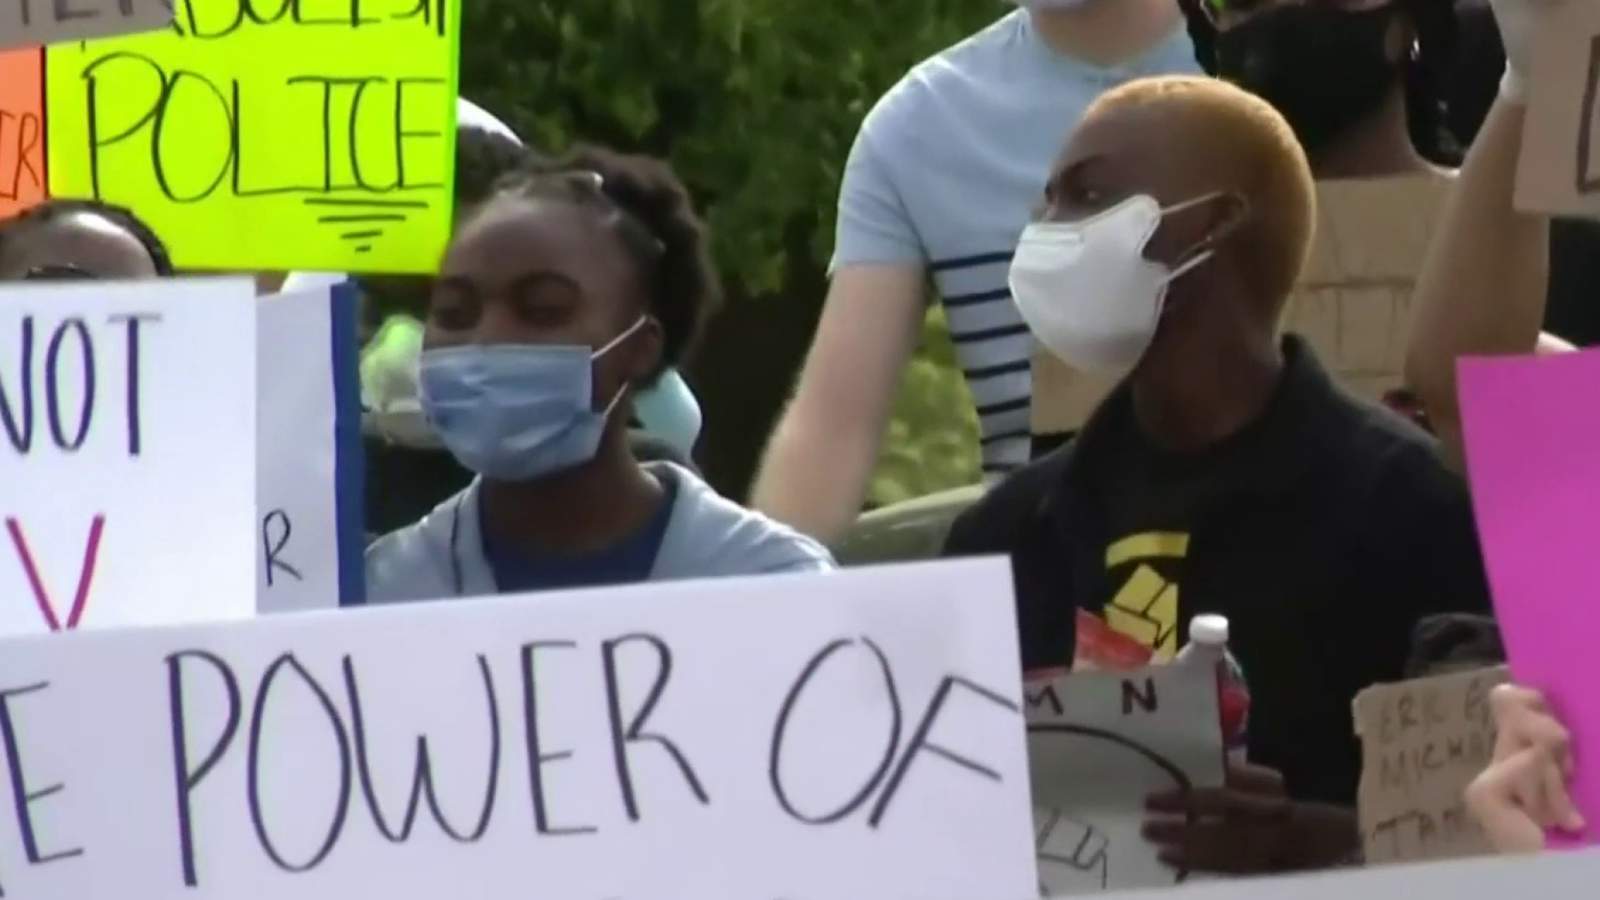 Detroit police resources stretched thin after 8 weeks of protests